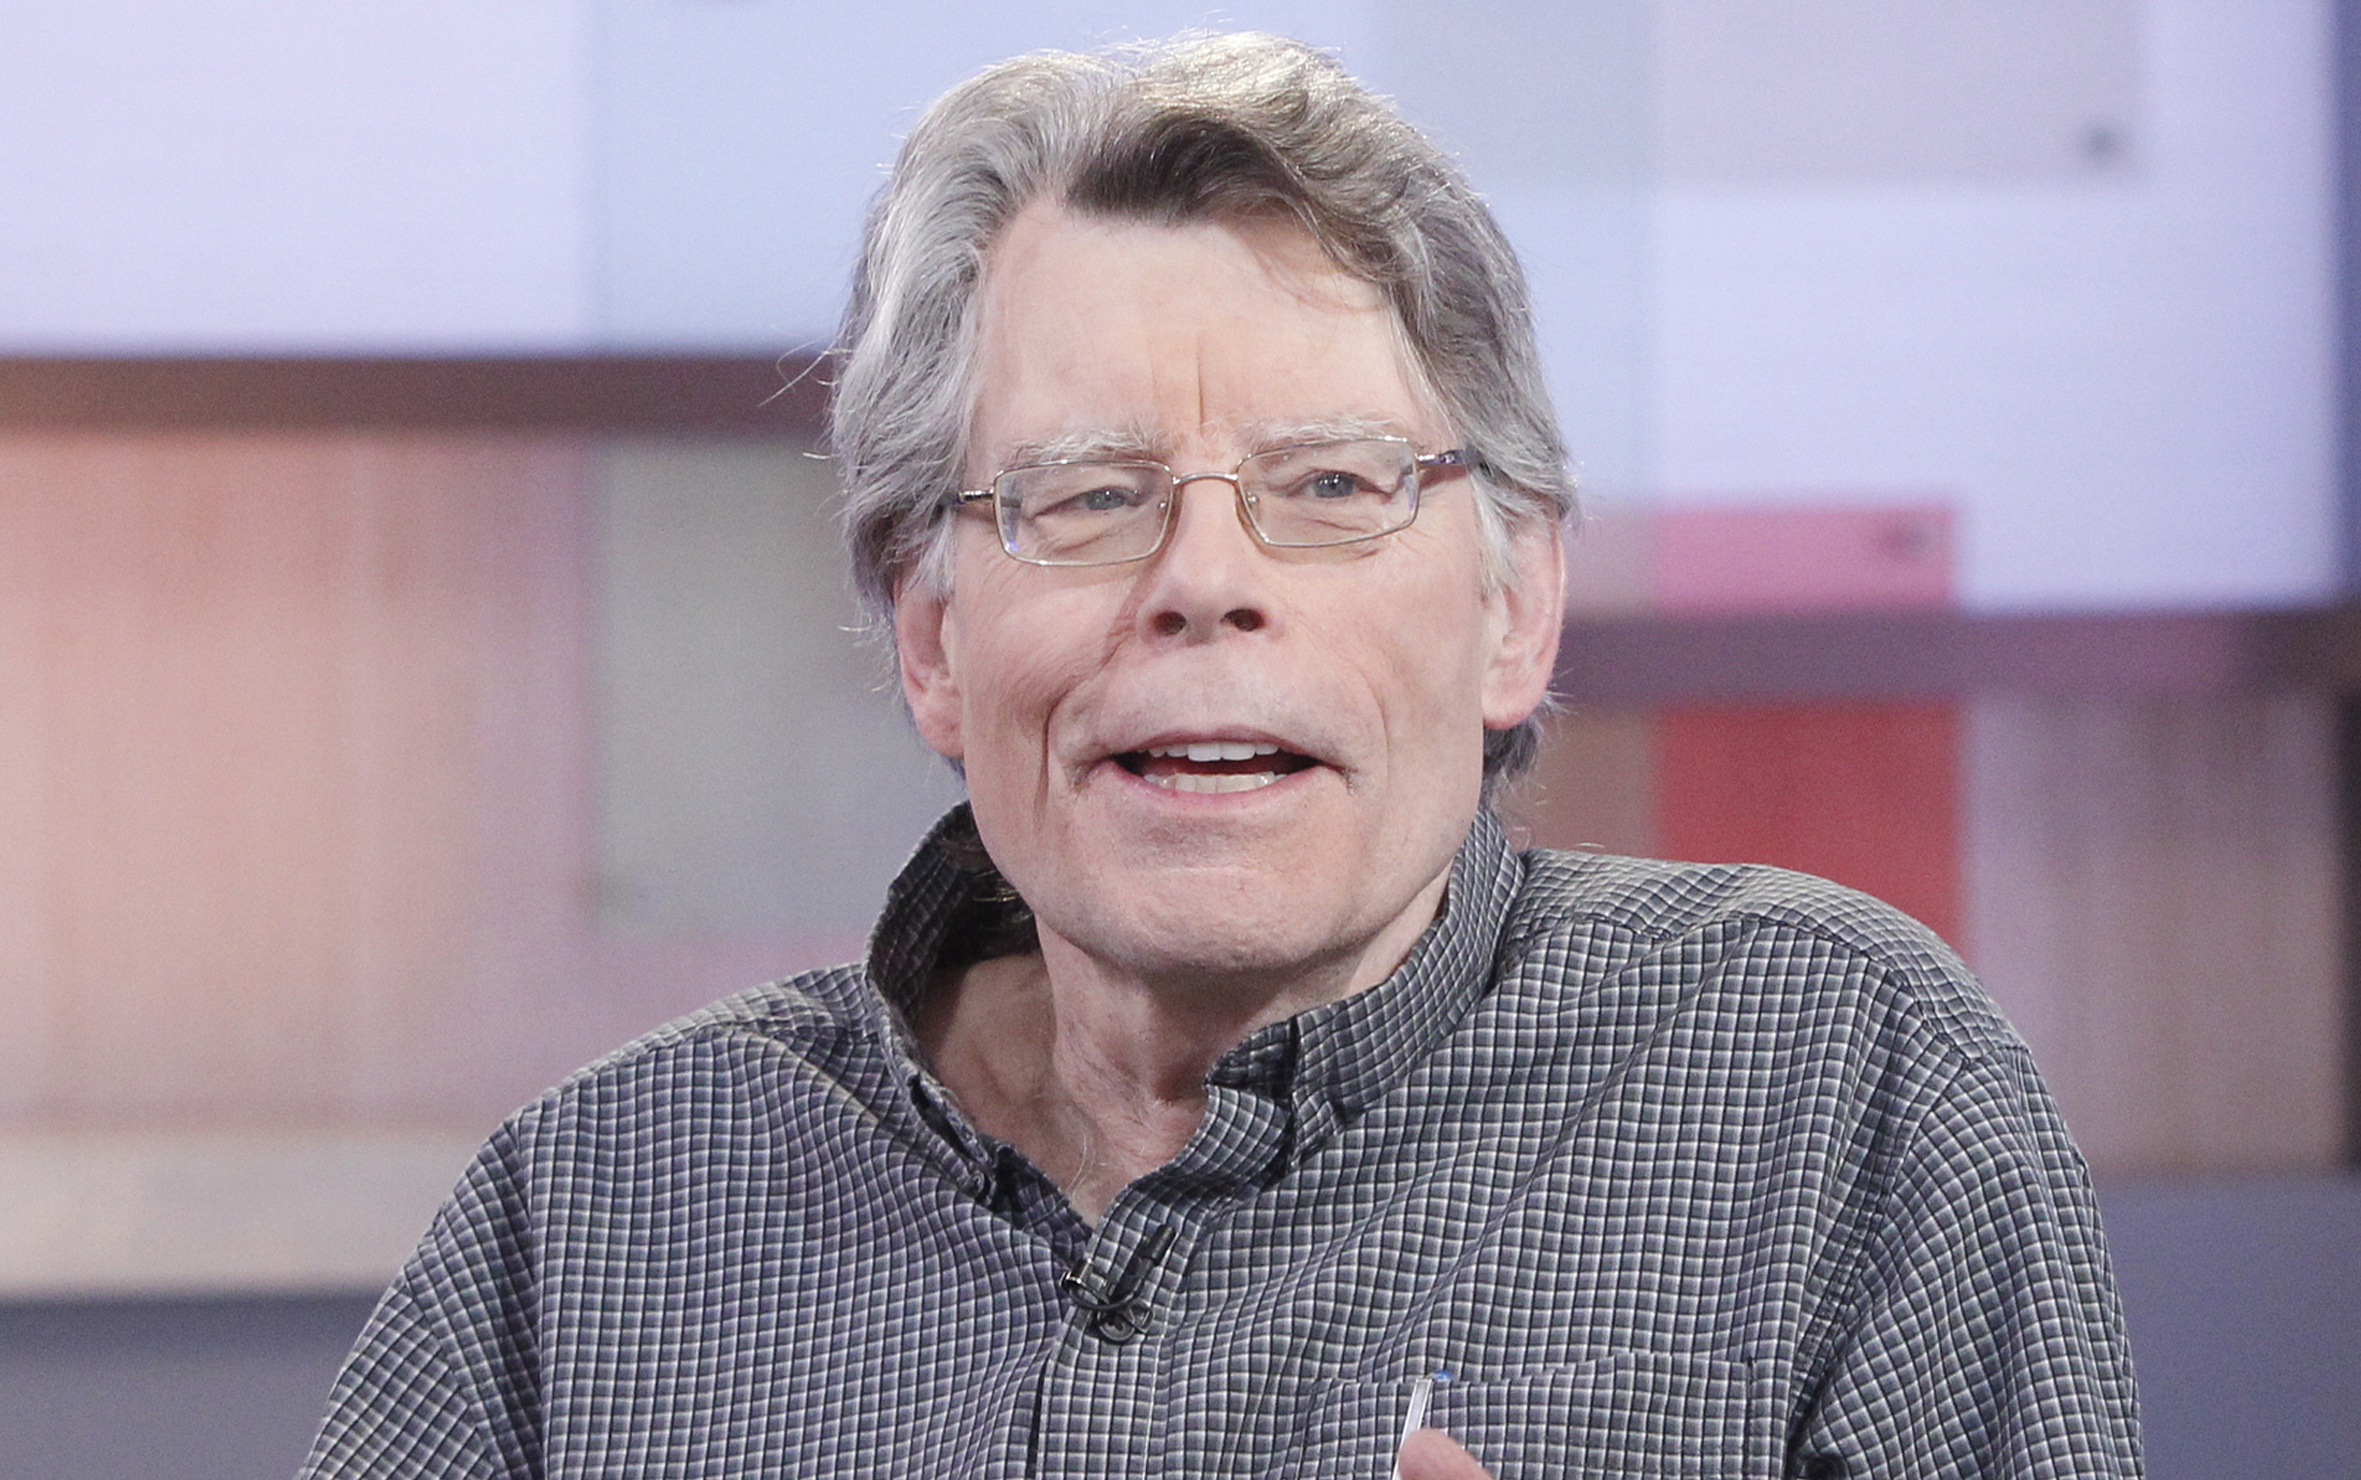 Conservatives Mock Stephen King As ‘Transphobe’ For Claiming Abortion Would Be ‘Sacrament’ If ‘Men Could Get Pregnant’